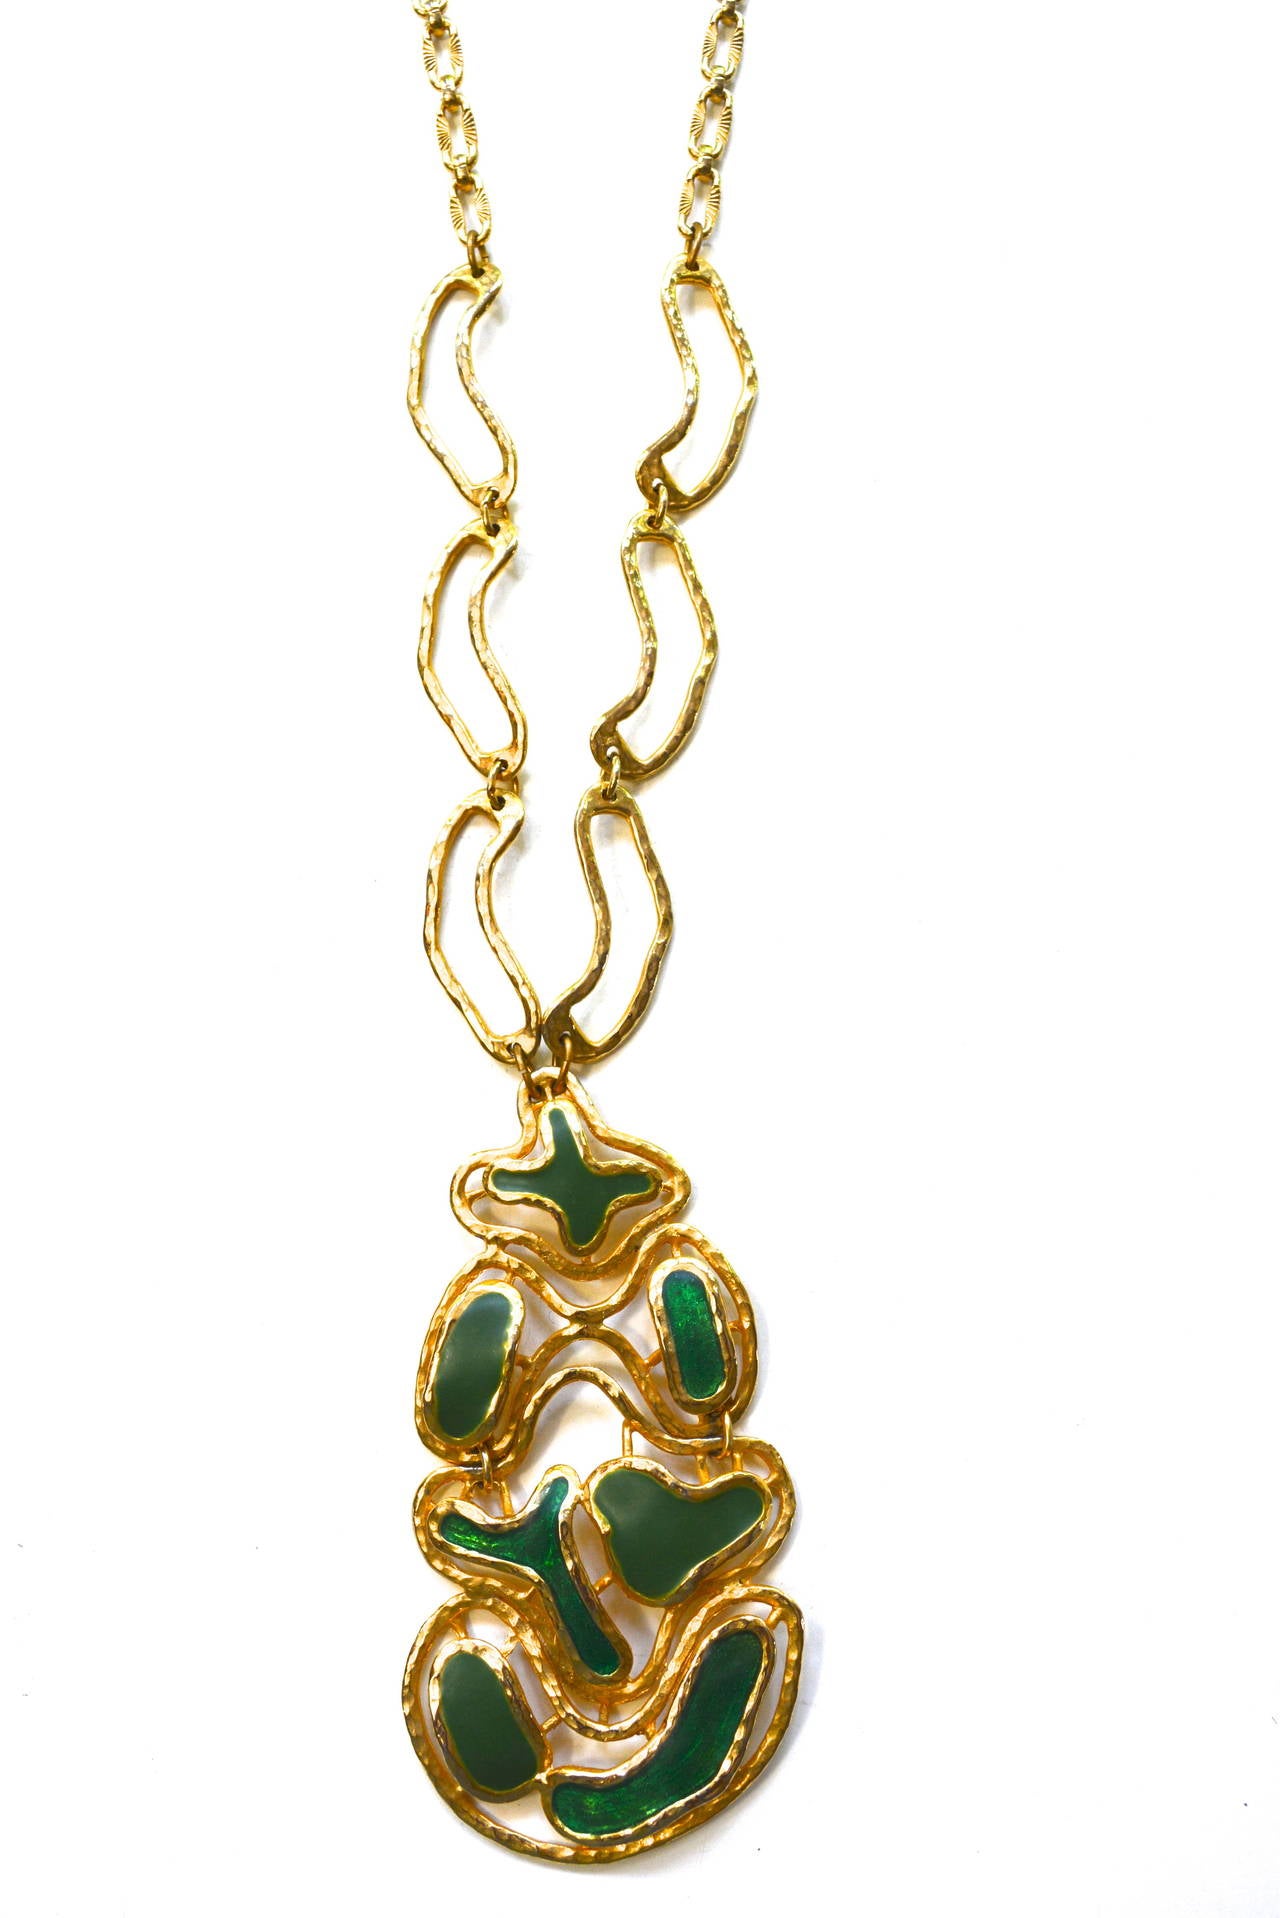 Circa 1960s-70s large green enamel and poured resin pendant with golden metal chunky chain links. The piece is unsigned but has a great look and feel. The chain width varies at .5